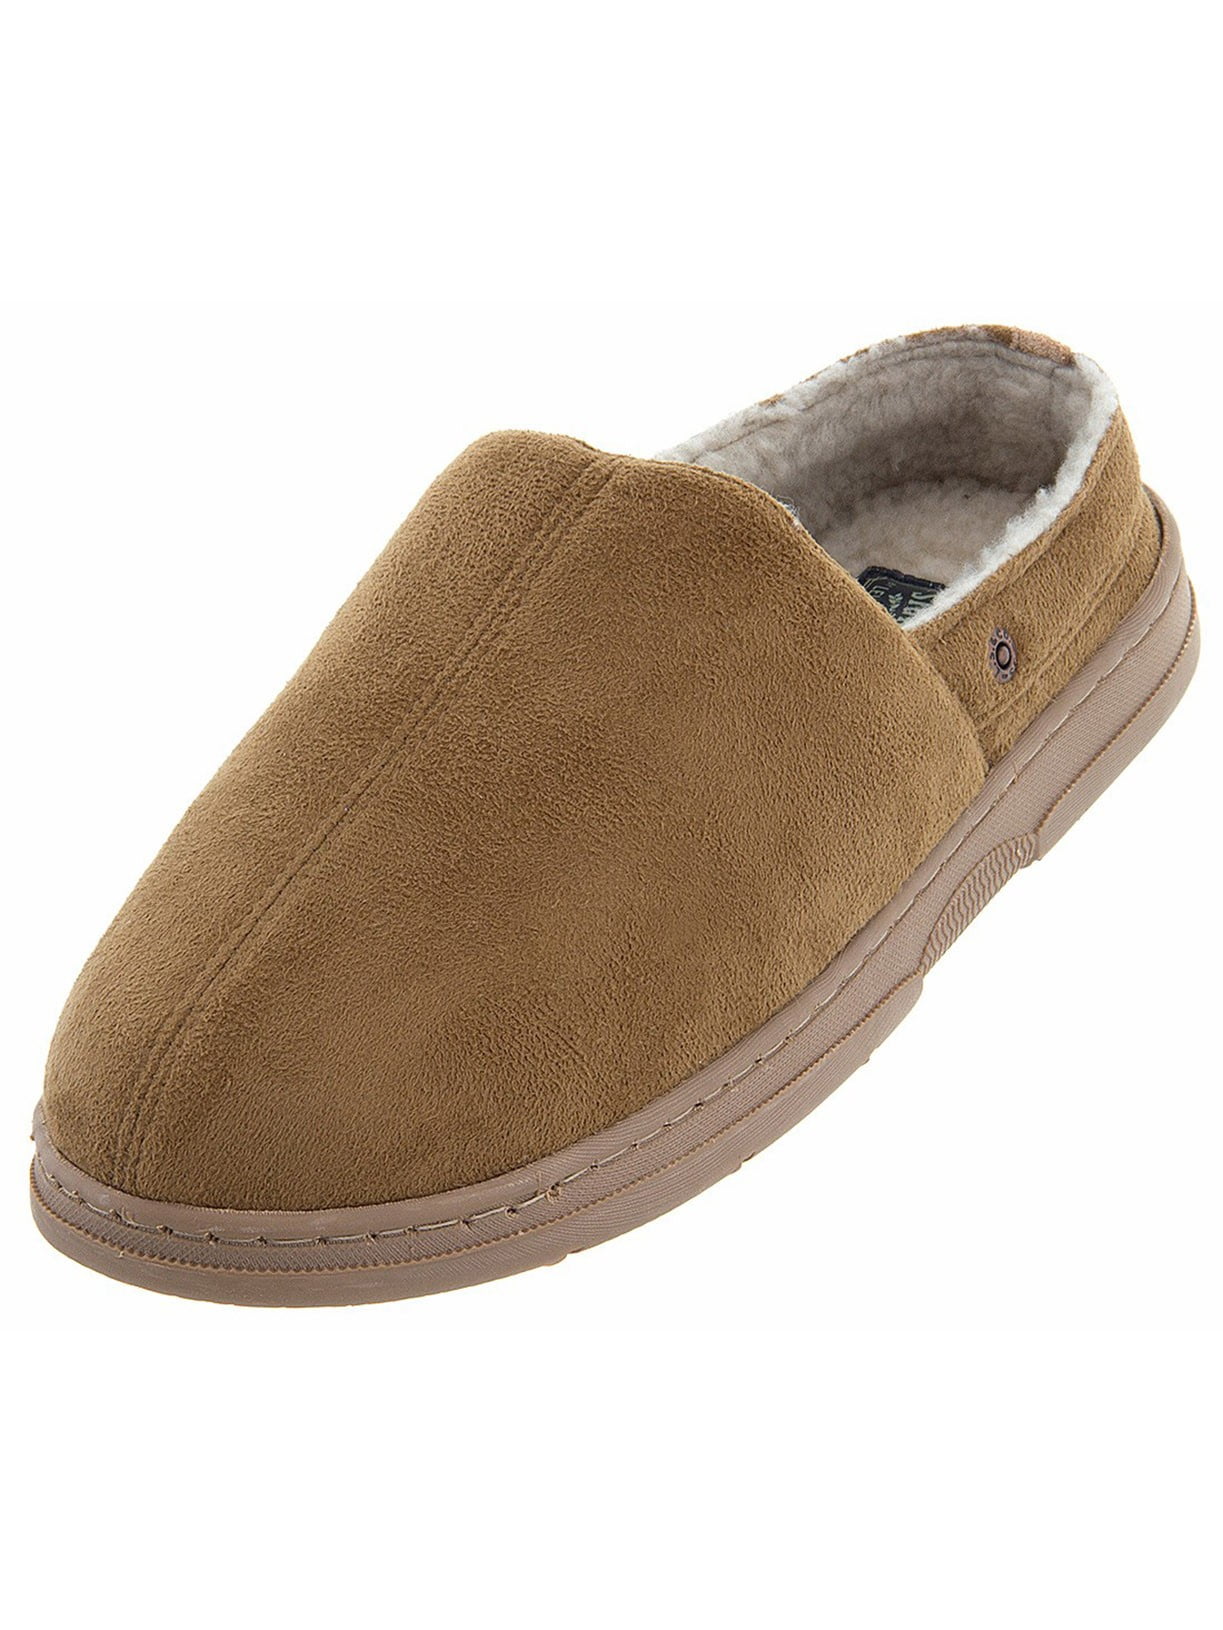 Signature by Levi Strauss & Co. Men's Chestnut Clog Slippers 